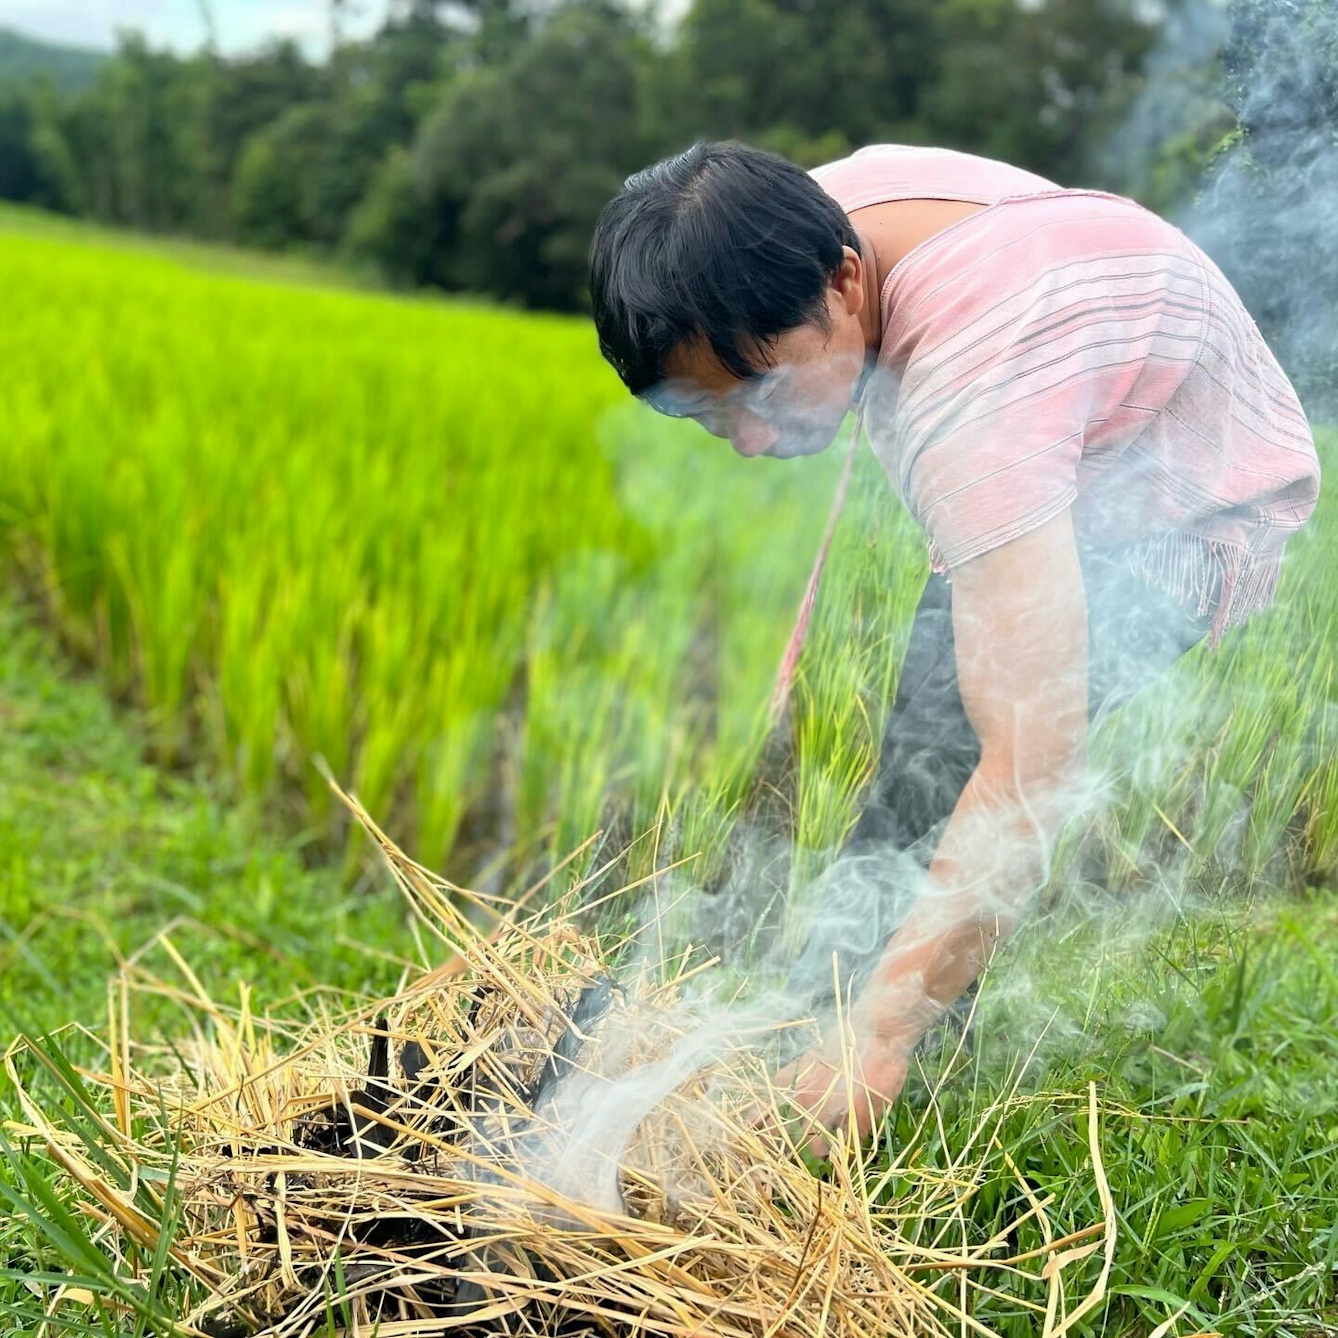 A photograph of a Thai man tending to small fire of dried vegetation. In the background are fields of green crops.